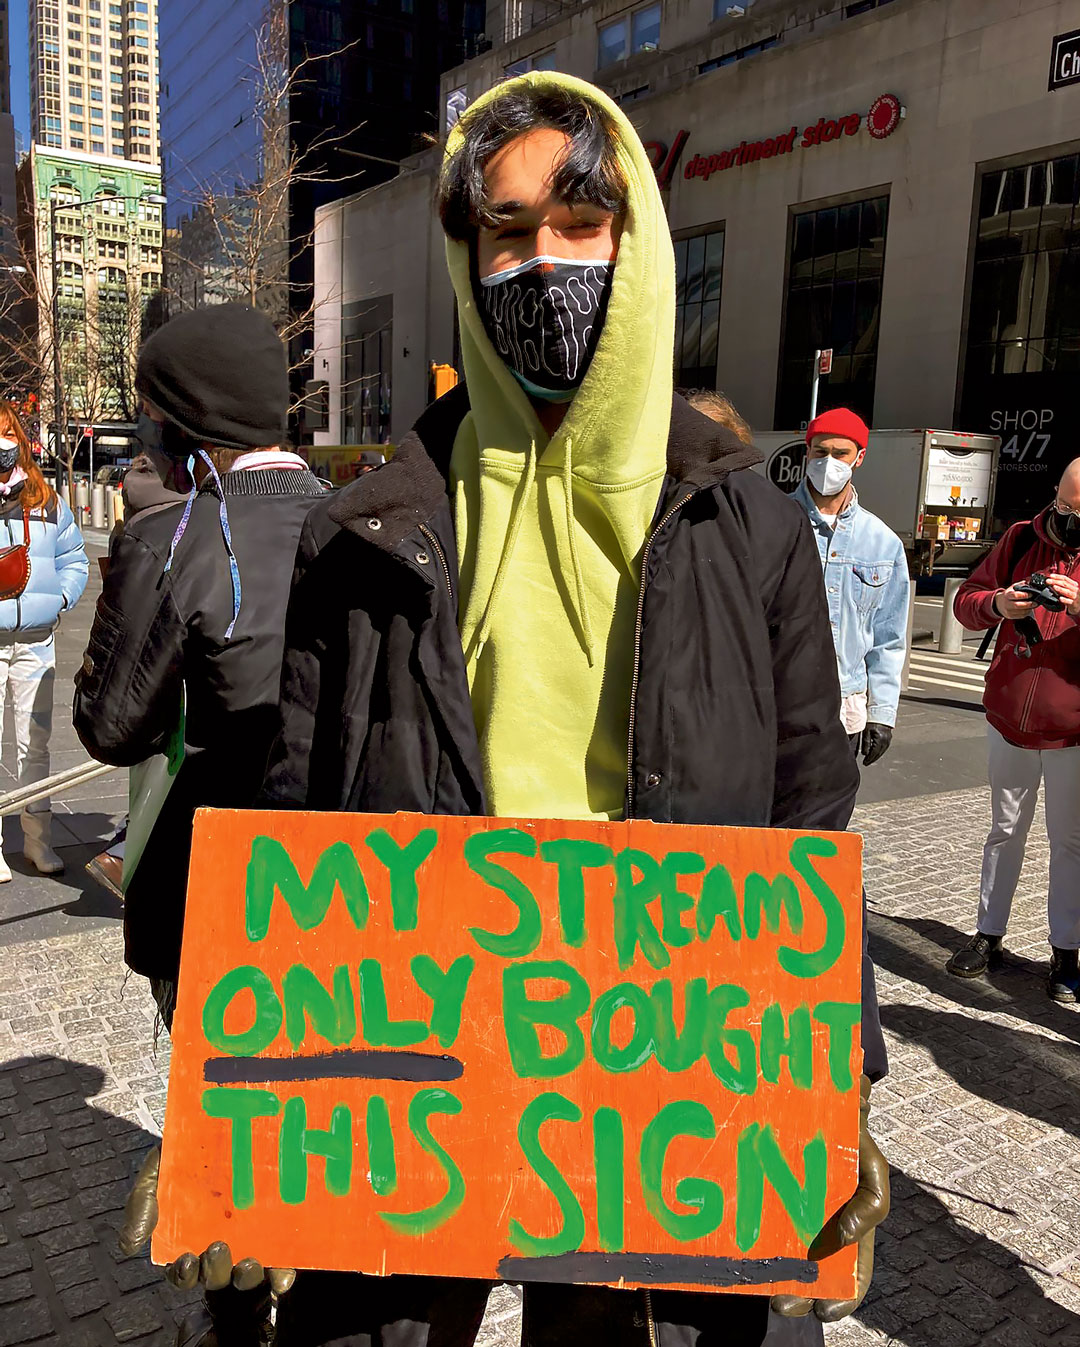 Un manifestant tient une pancarte "My streams only bought this sign" à New York